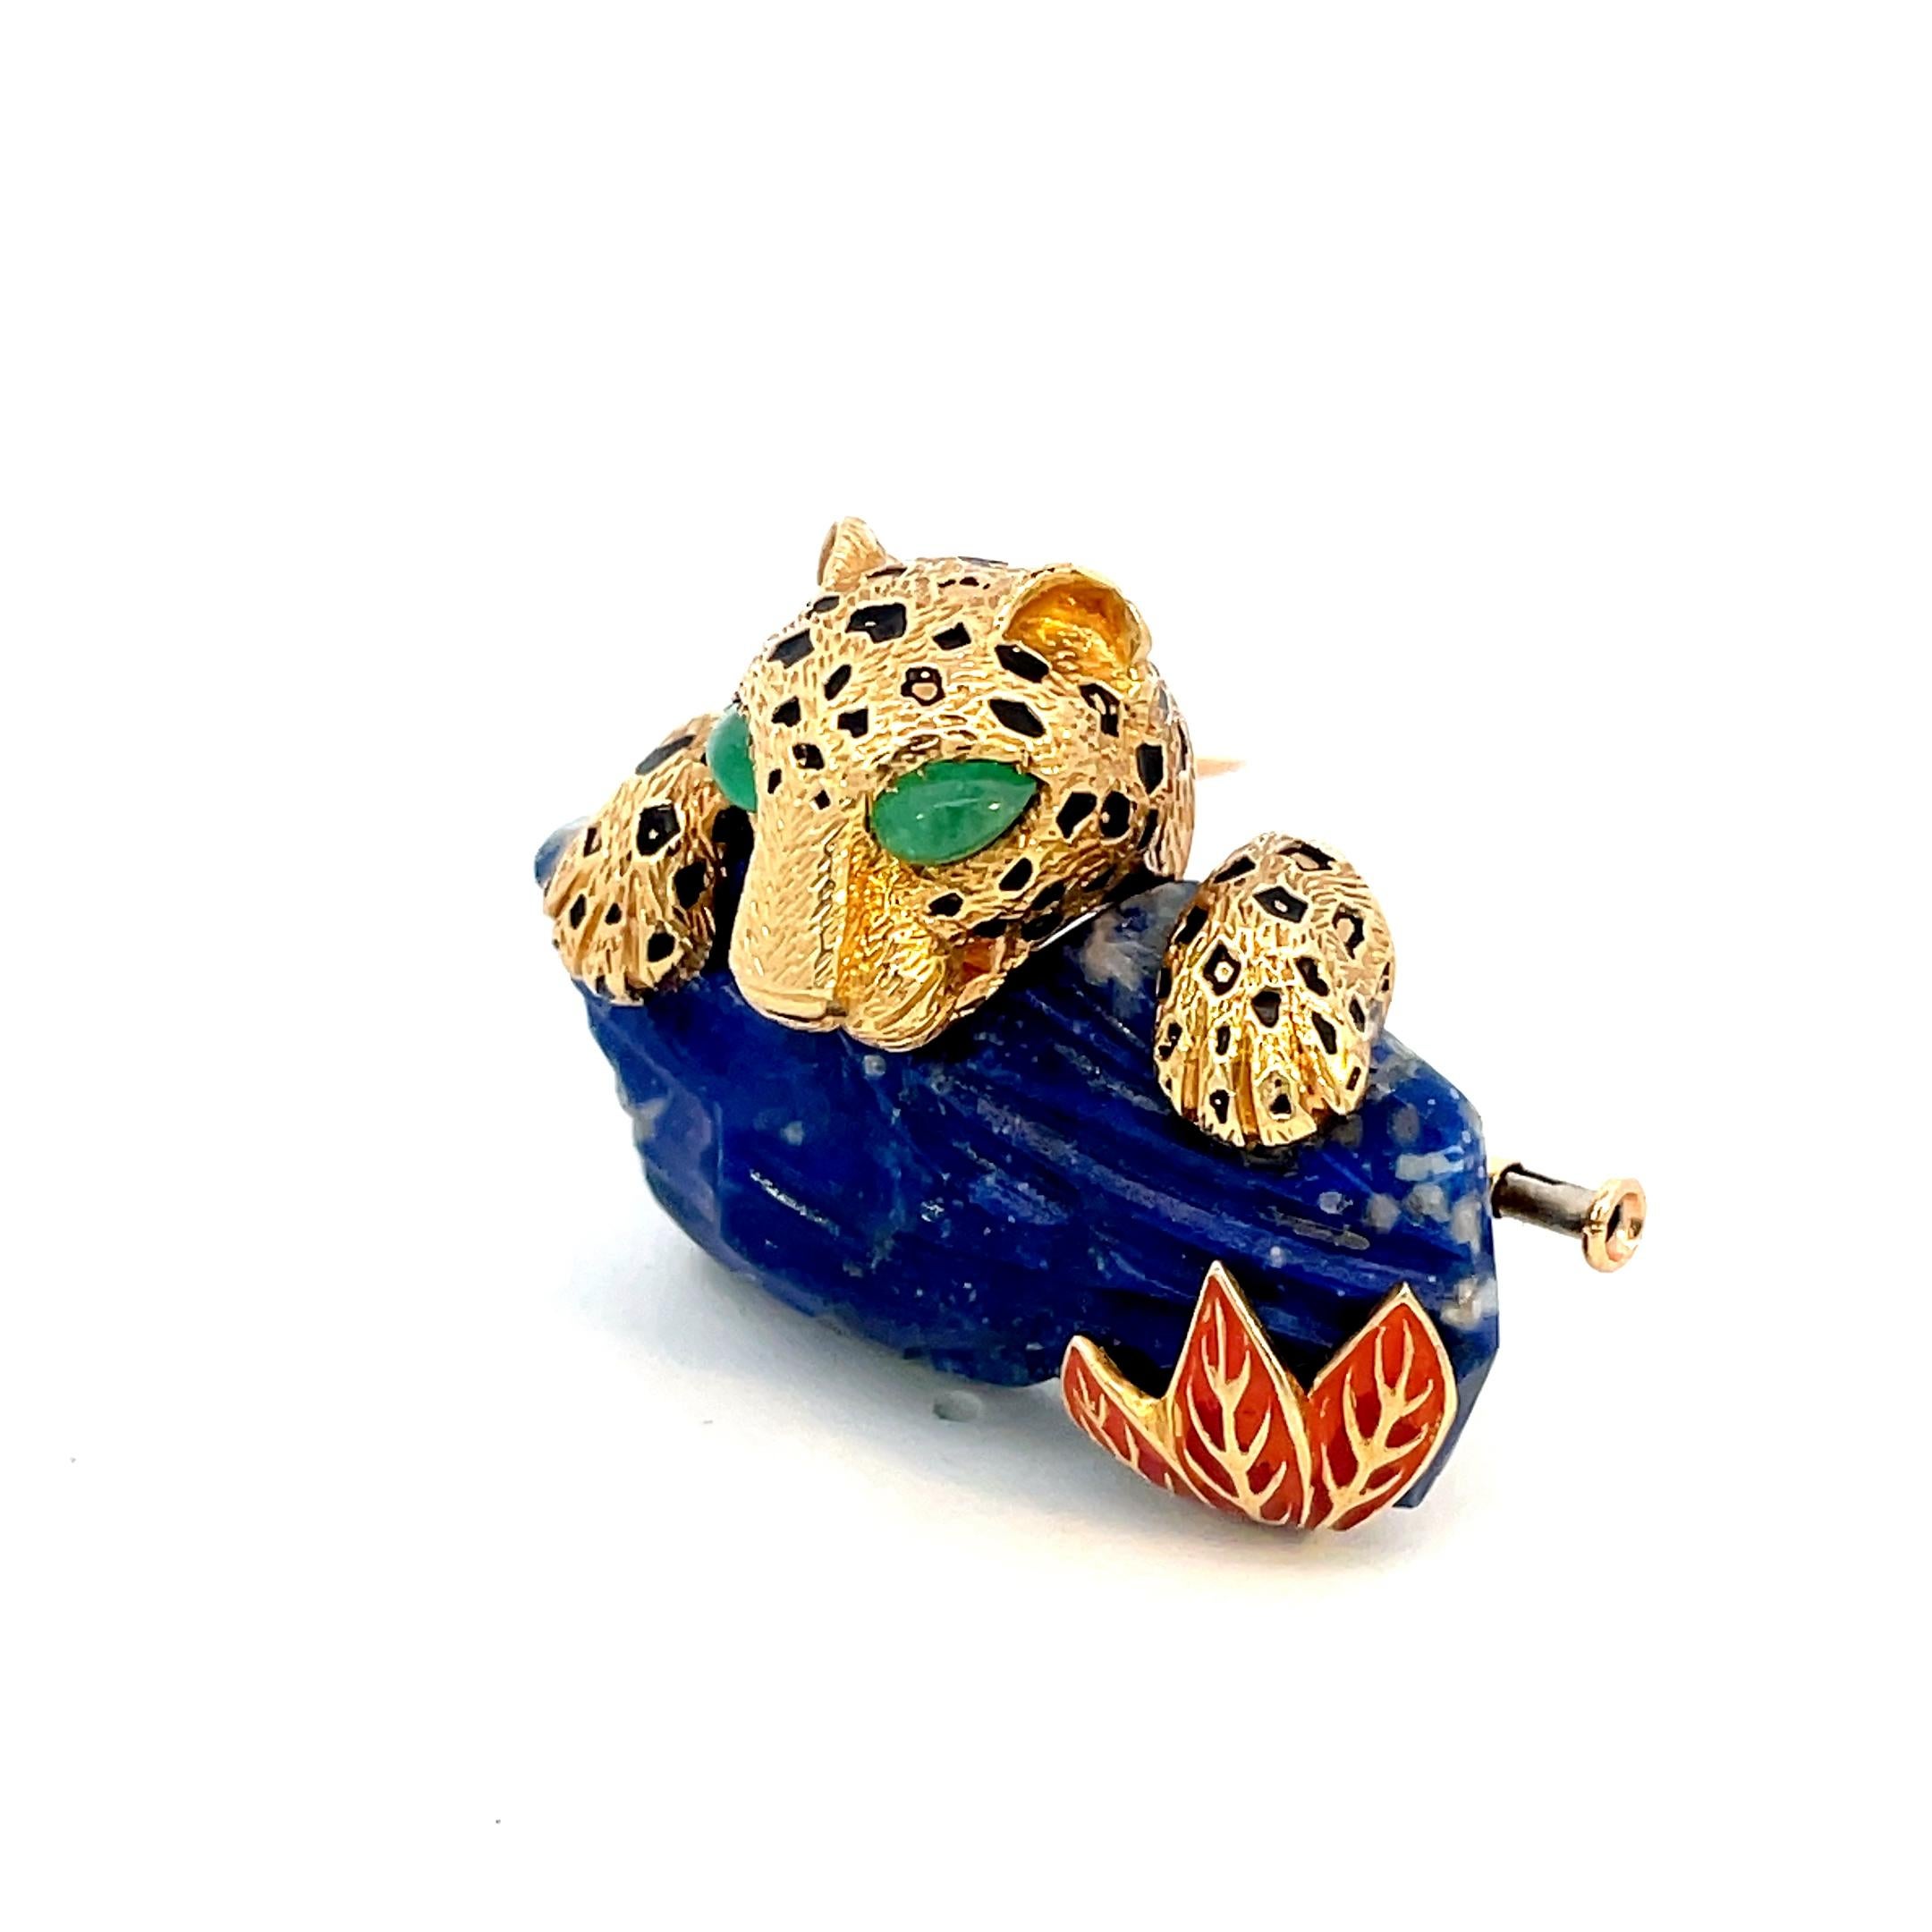 Unique 1973 Cartier Panthere Brooch designed as a panther swimming in water, with cabochon emerald eyes and black enamel spots, to the carved lapis lazuli highlighted with red enamel leaves, mounted in 18 karat yellow gold, signed Cartier, numbered,